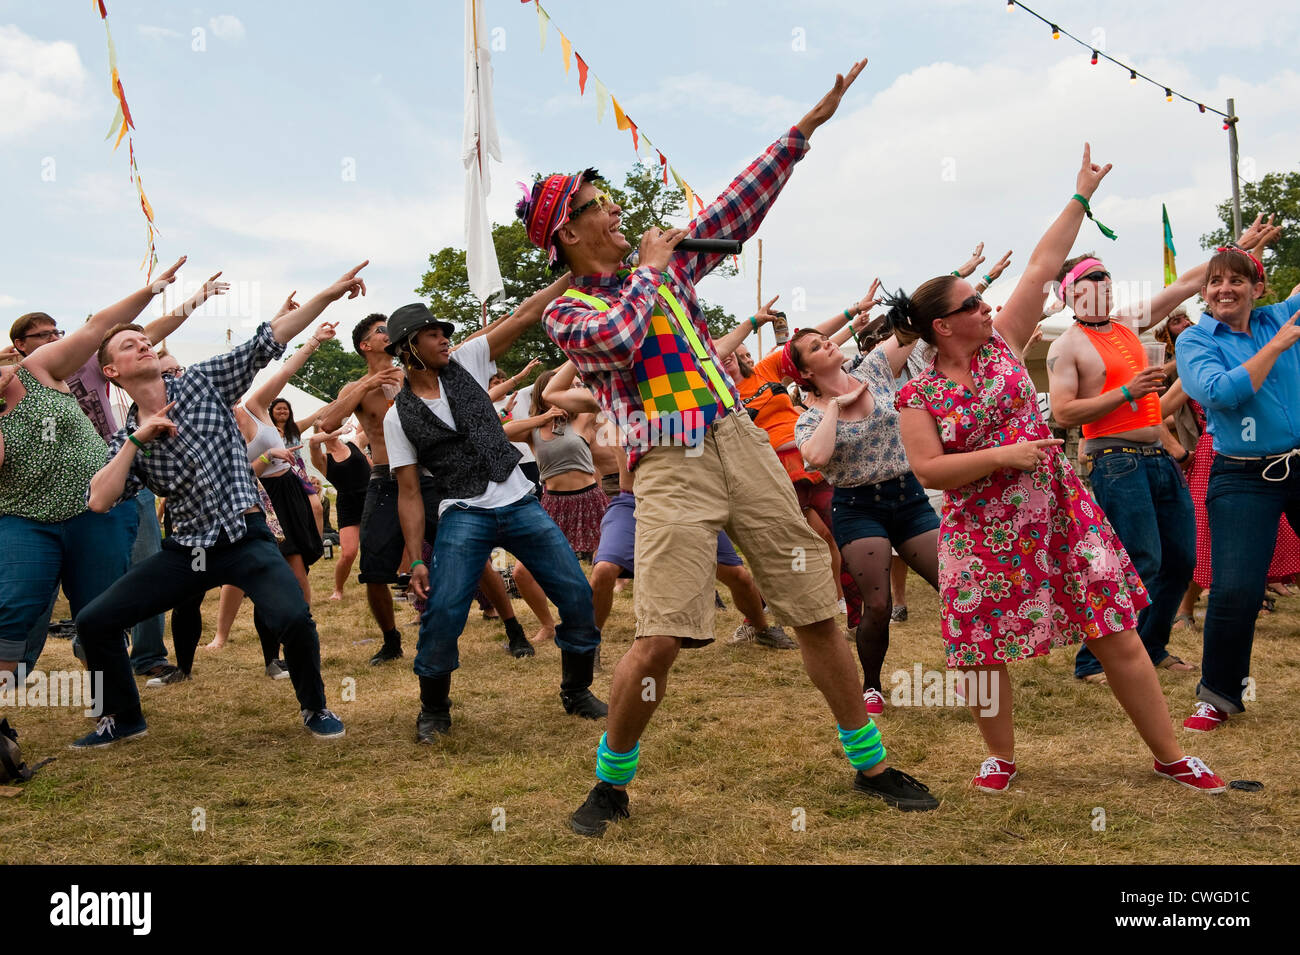 Kester Francis and Pippa Tooher of Swing Patrol lead a swing dance class at the Wilderness music festival, Cornbury, Oxfordshire, UK Stock Photo